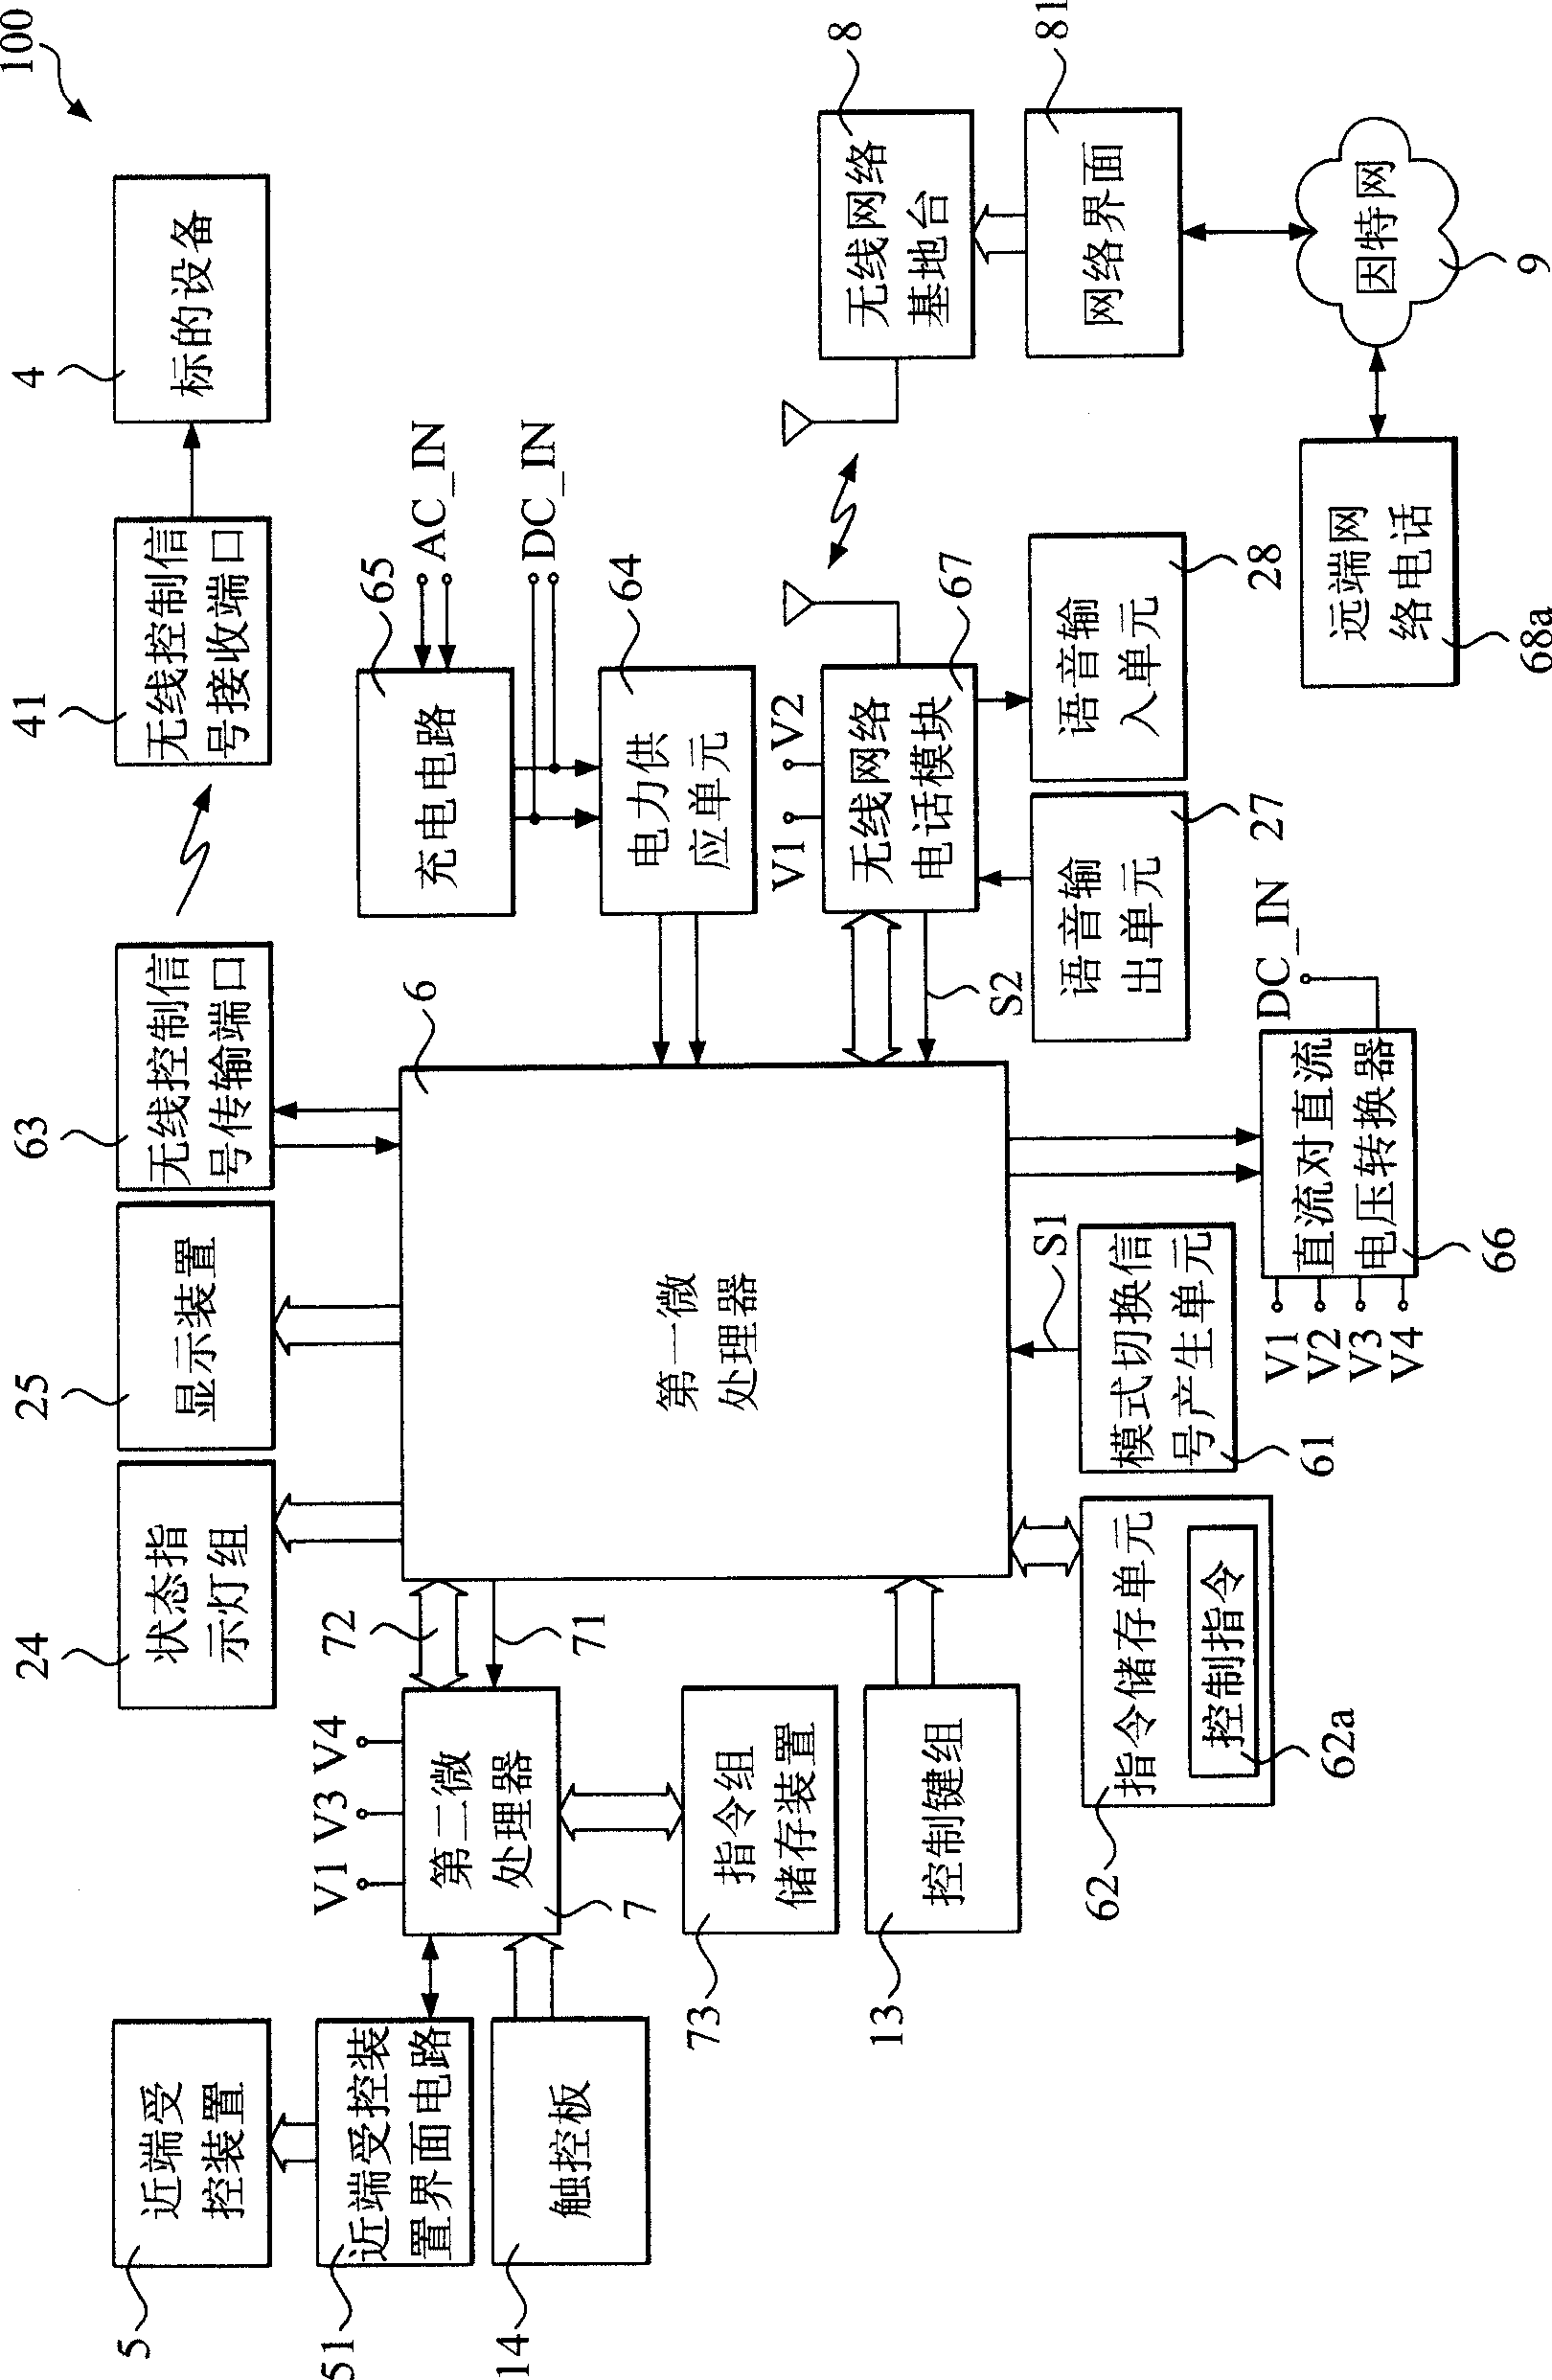 Remote control integrating device with operation mode switch function